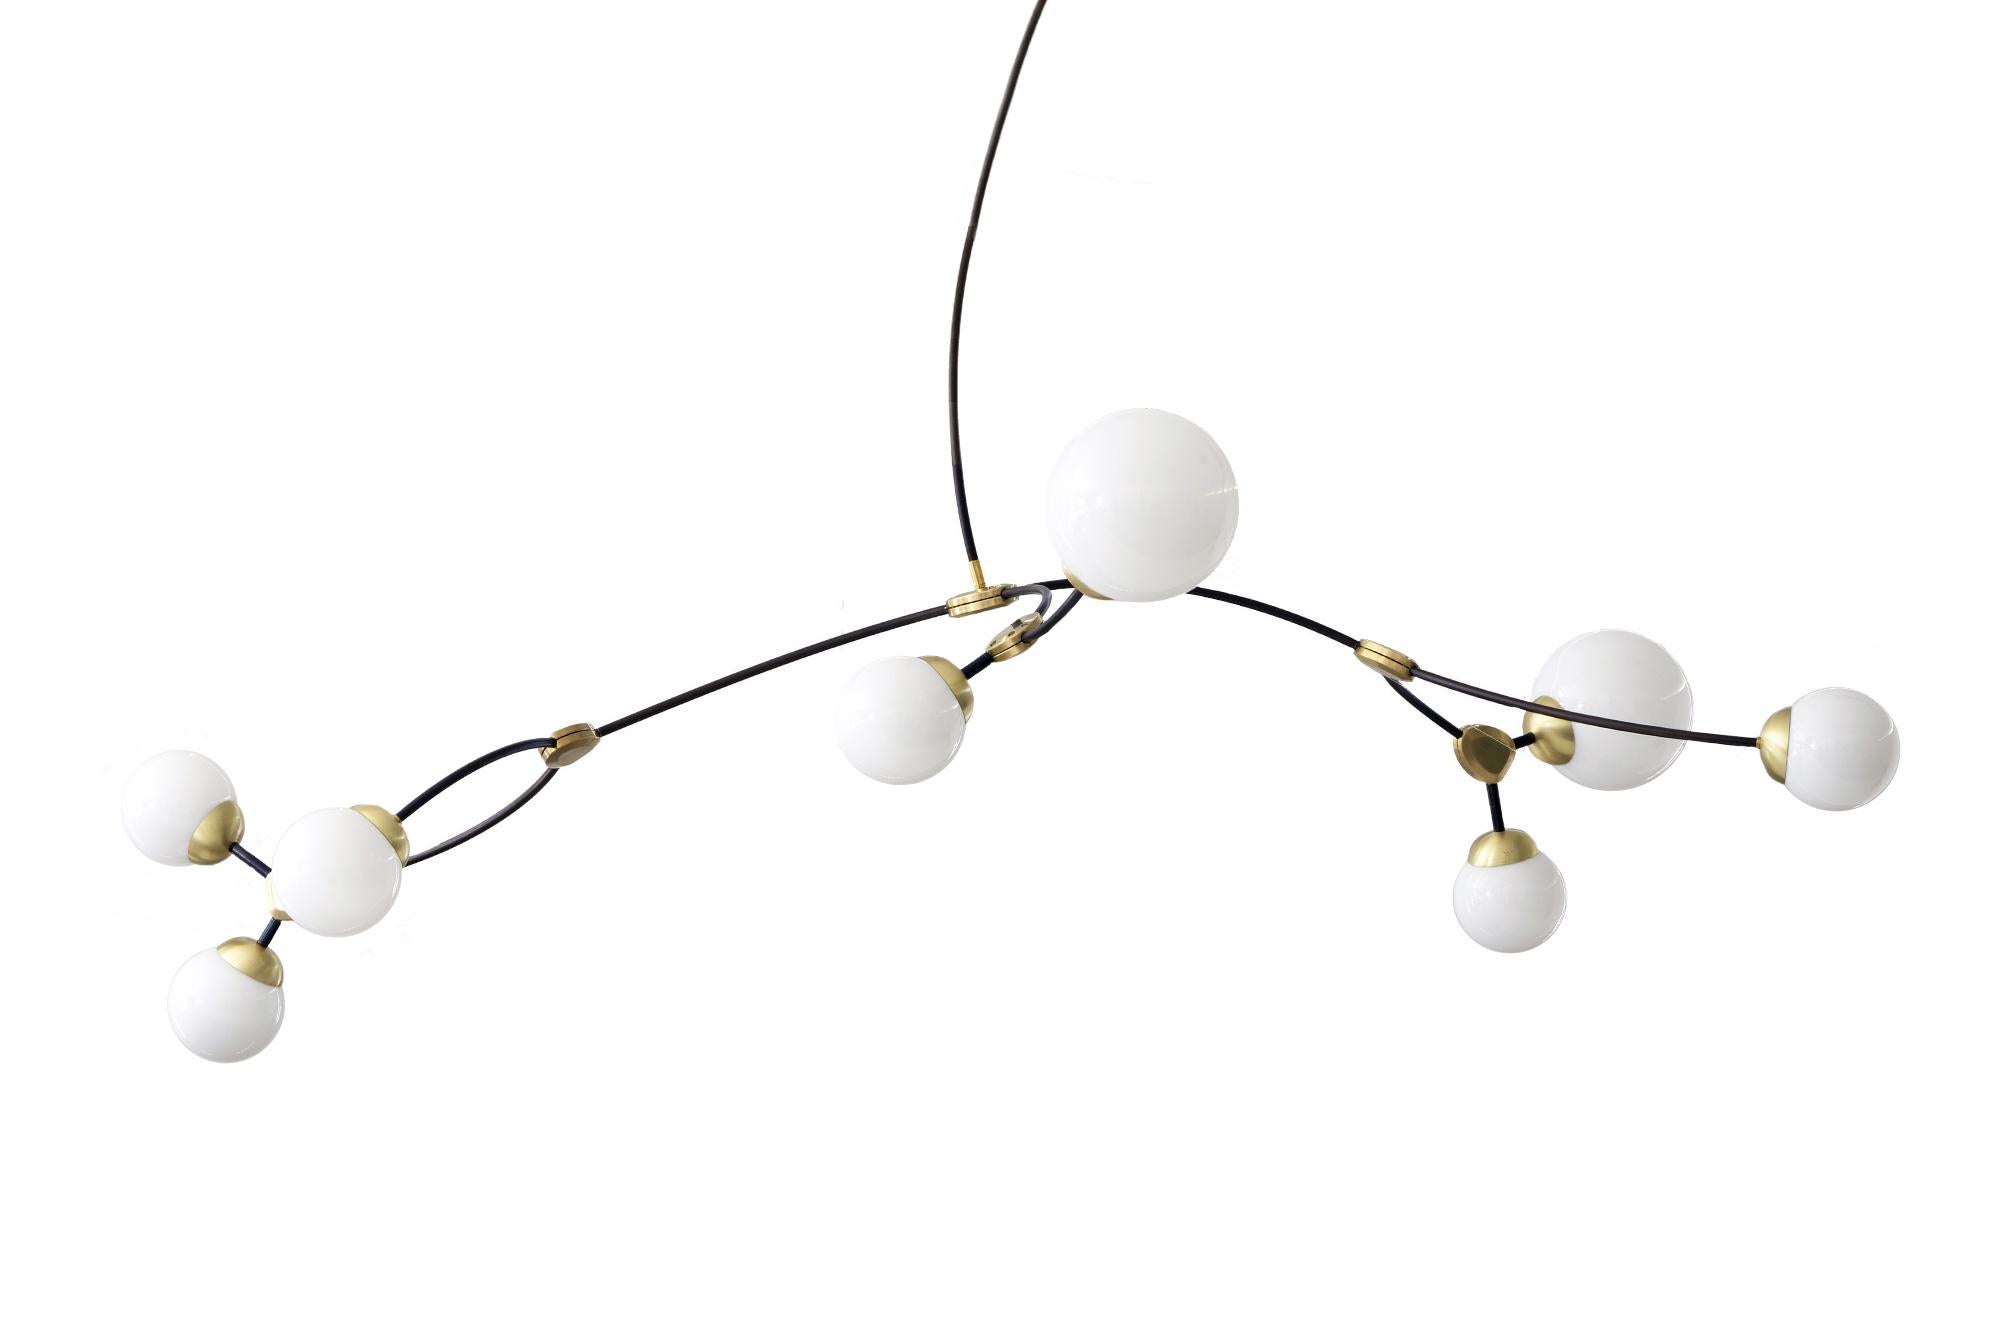 Ivy pendant 8 lamp by CTO Lighting
Materials: bronze with satin brass details and opal glass shades
Dimensions: H 42 x W 180 cm

All our lamps can be wired according to each country. If sold to the USA it will be wired for the USA for